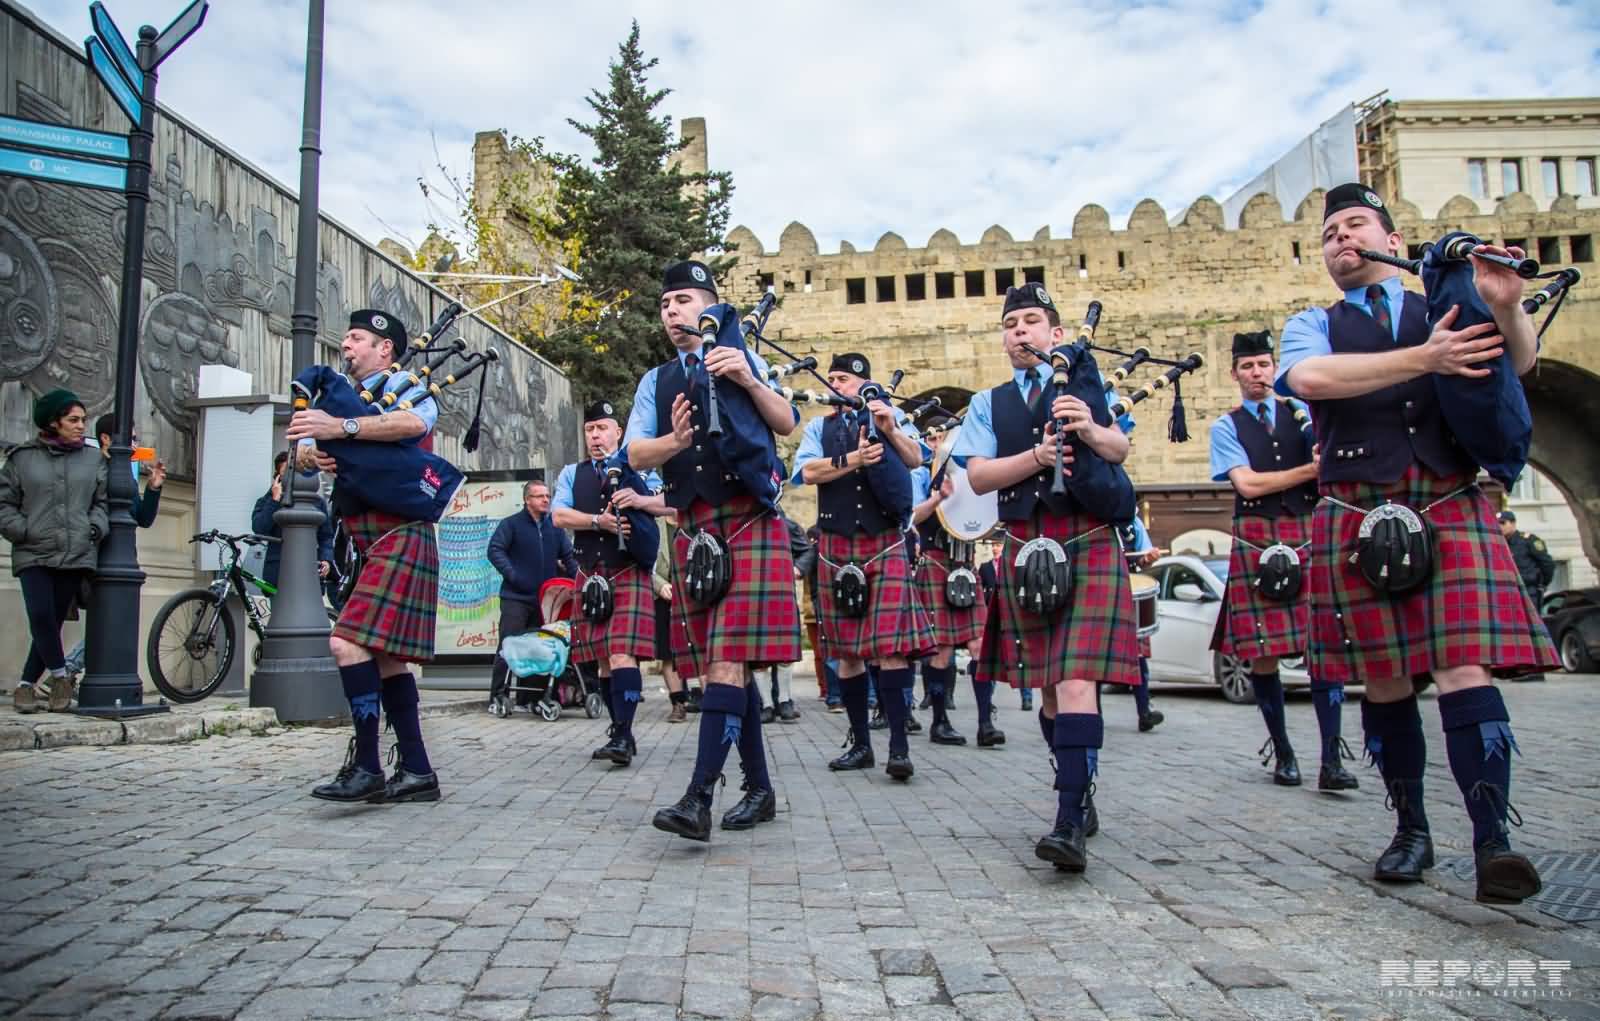 The Parade Of Scottish Pipers Group During St. Andrew's Day Celebration